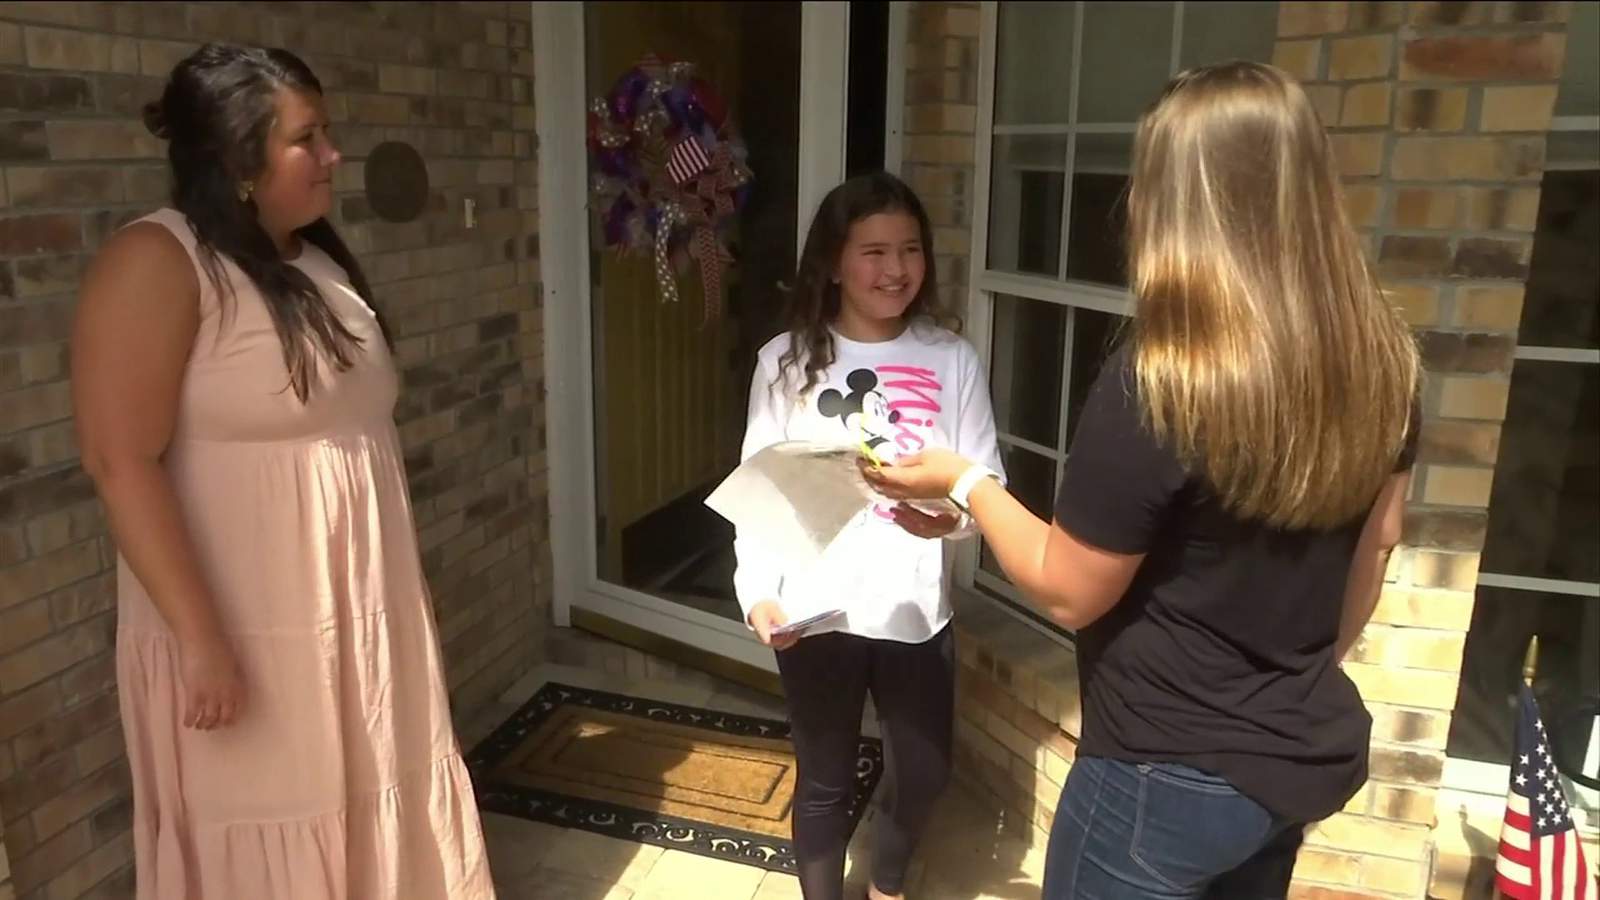 Teachers surprise students with end-of-year home visits